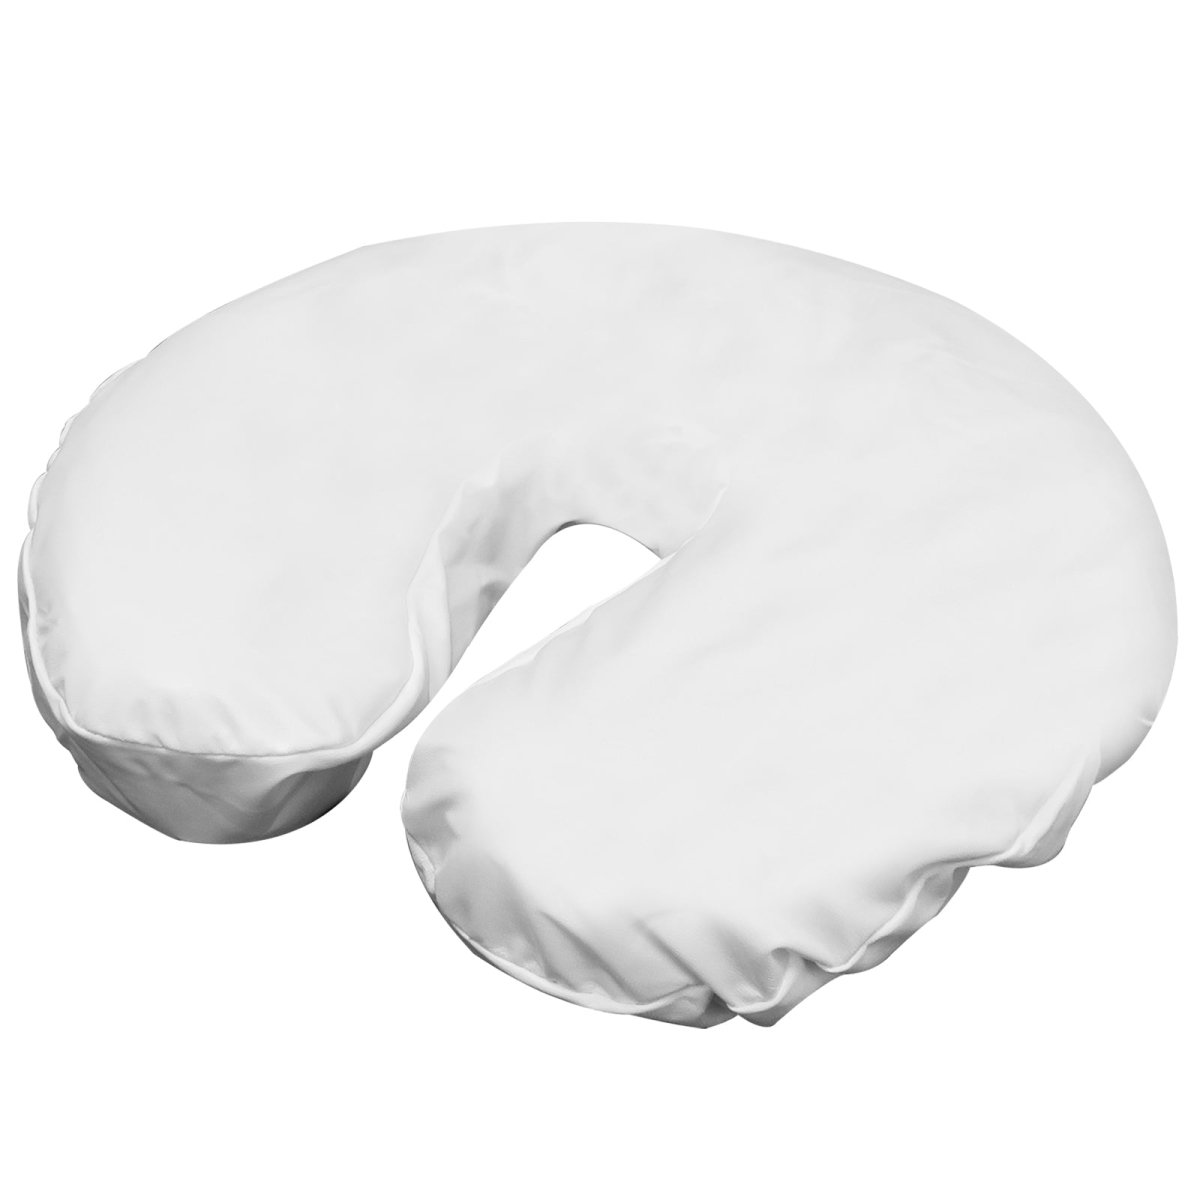 Waterproof Face Rest Cover - GreenLife-Face Rest Cover